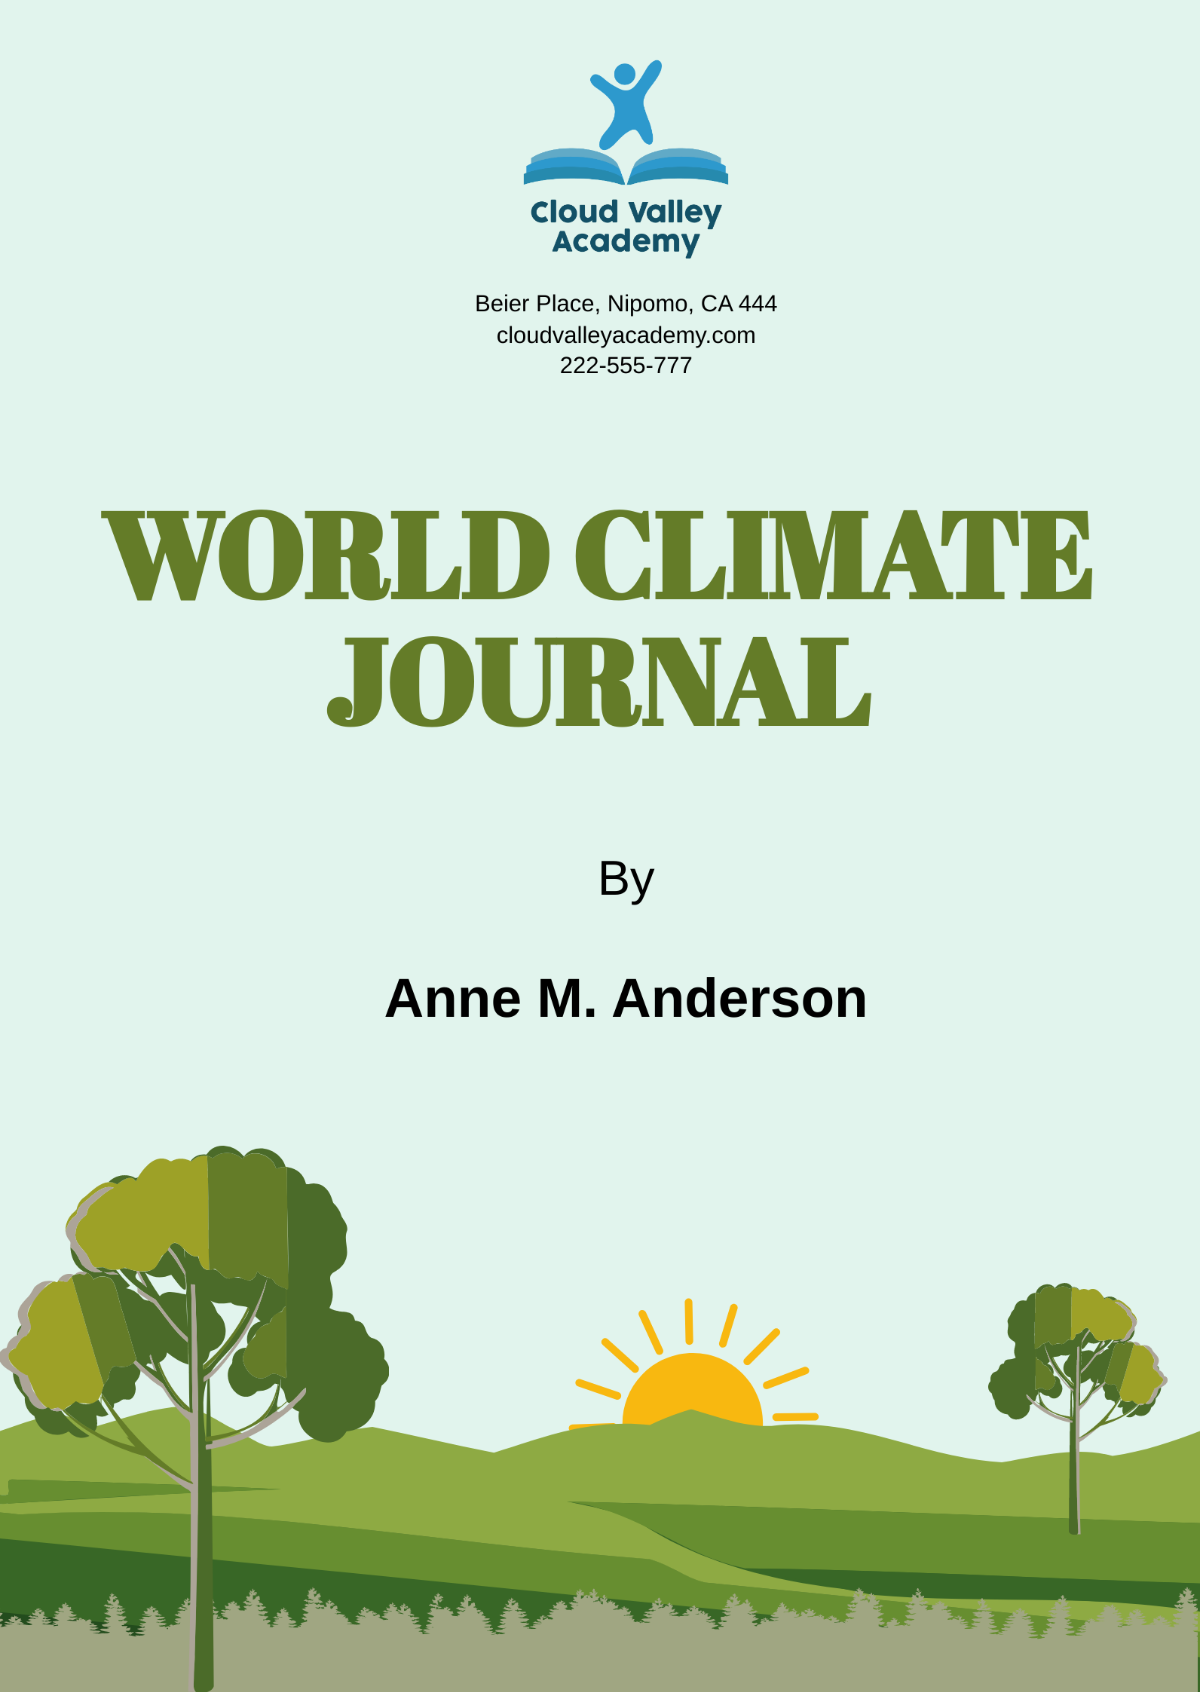 World Climate Journal Template